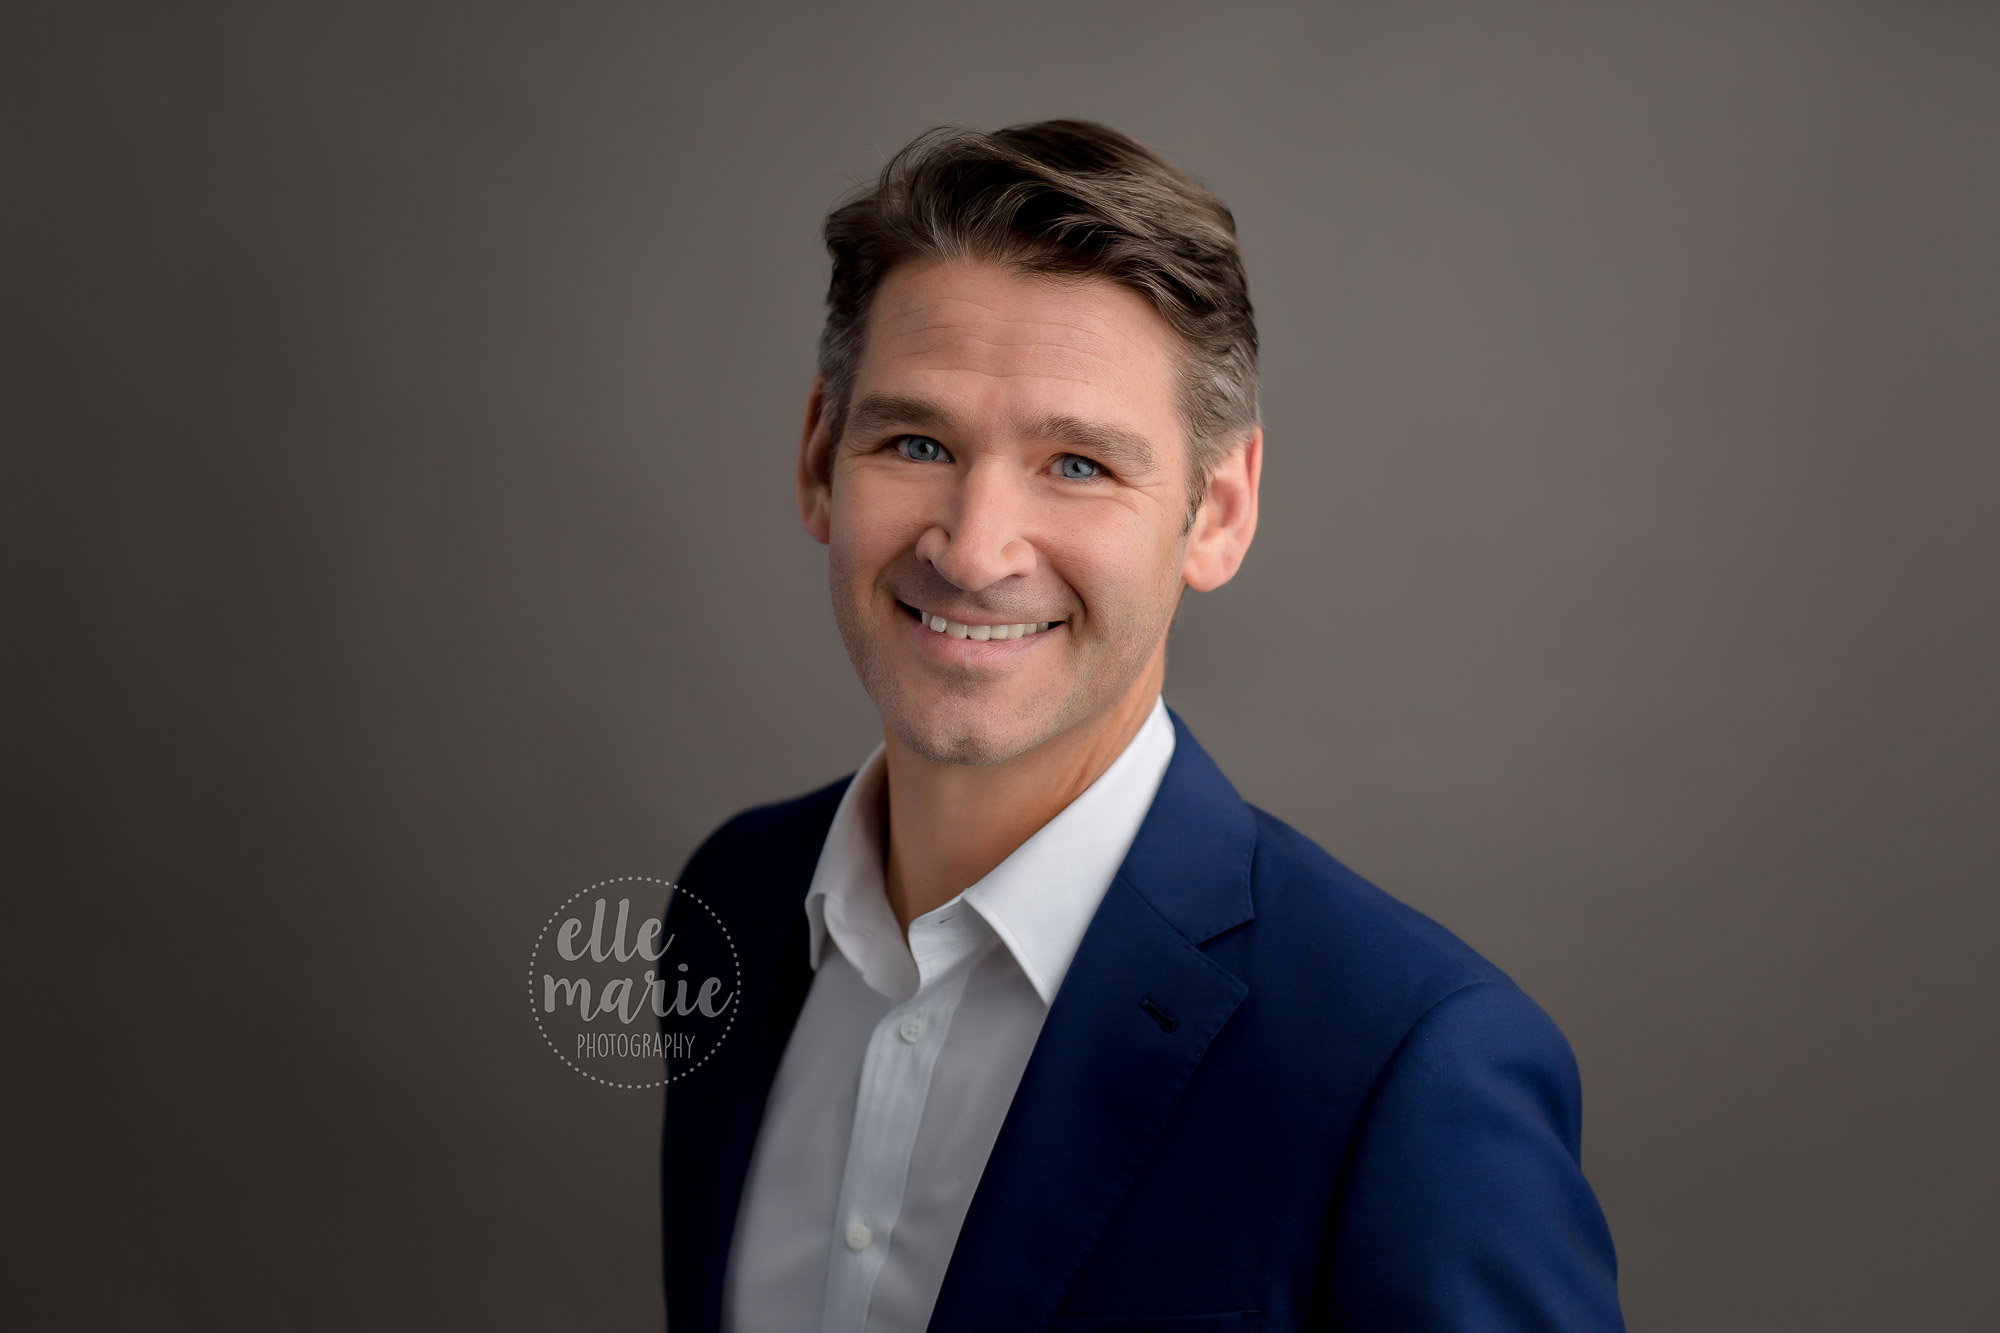 standard business headshot of a man with a slightly relaxed feel